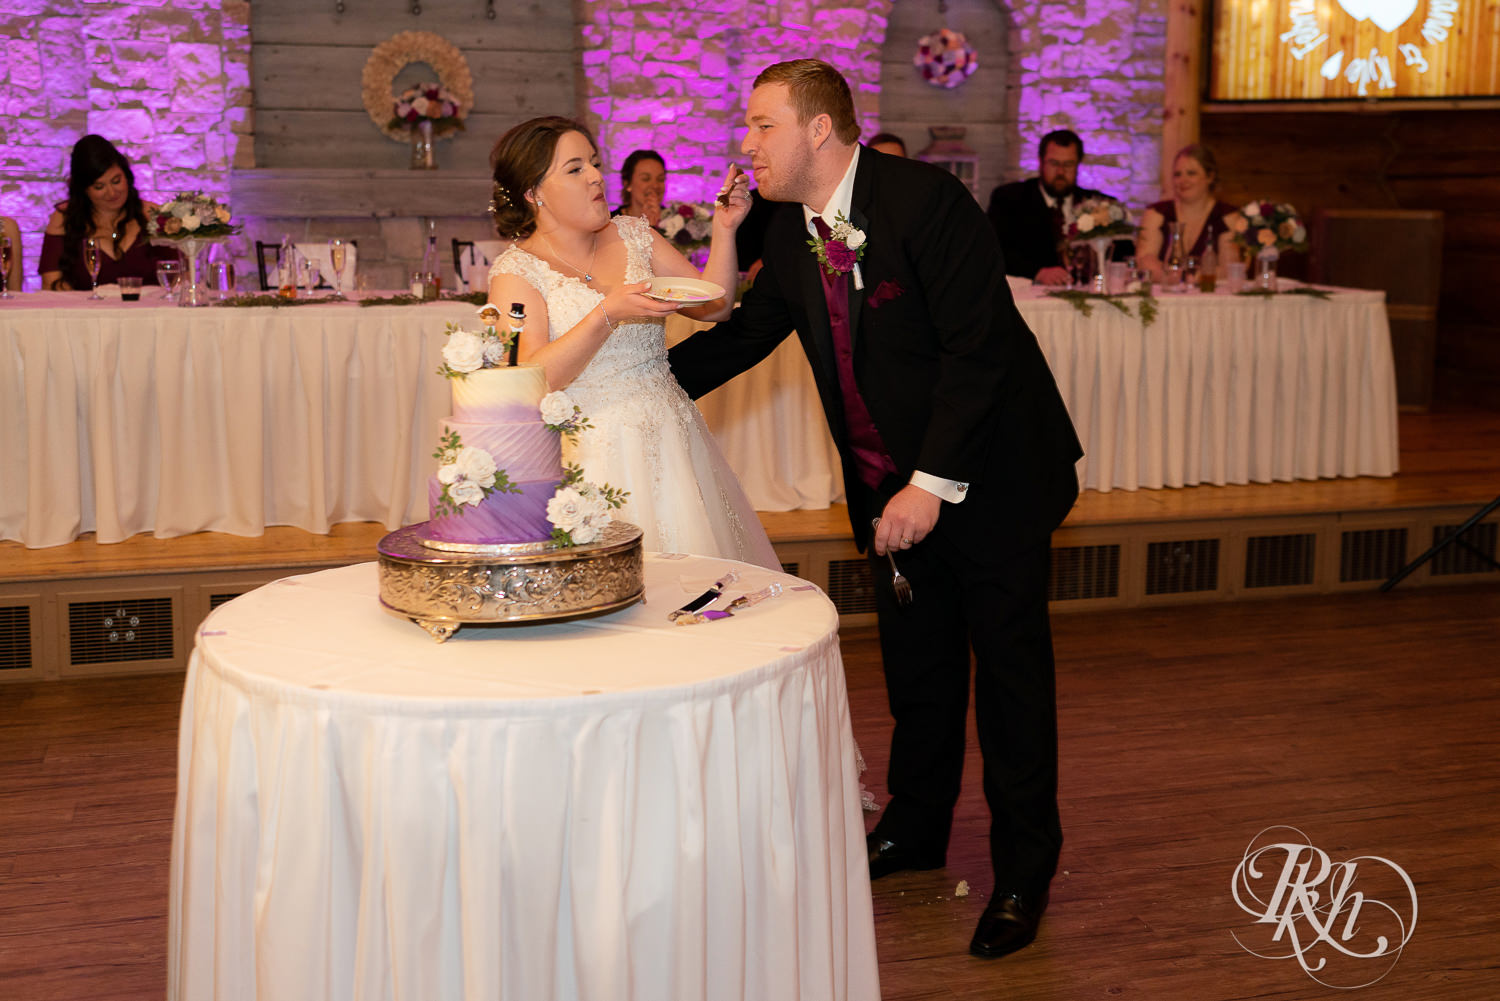 Bride and groom cut and eat cake at wedding reception at Glenhaven Events in Farmington, Minnesota.